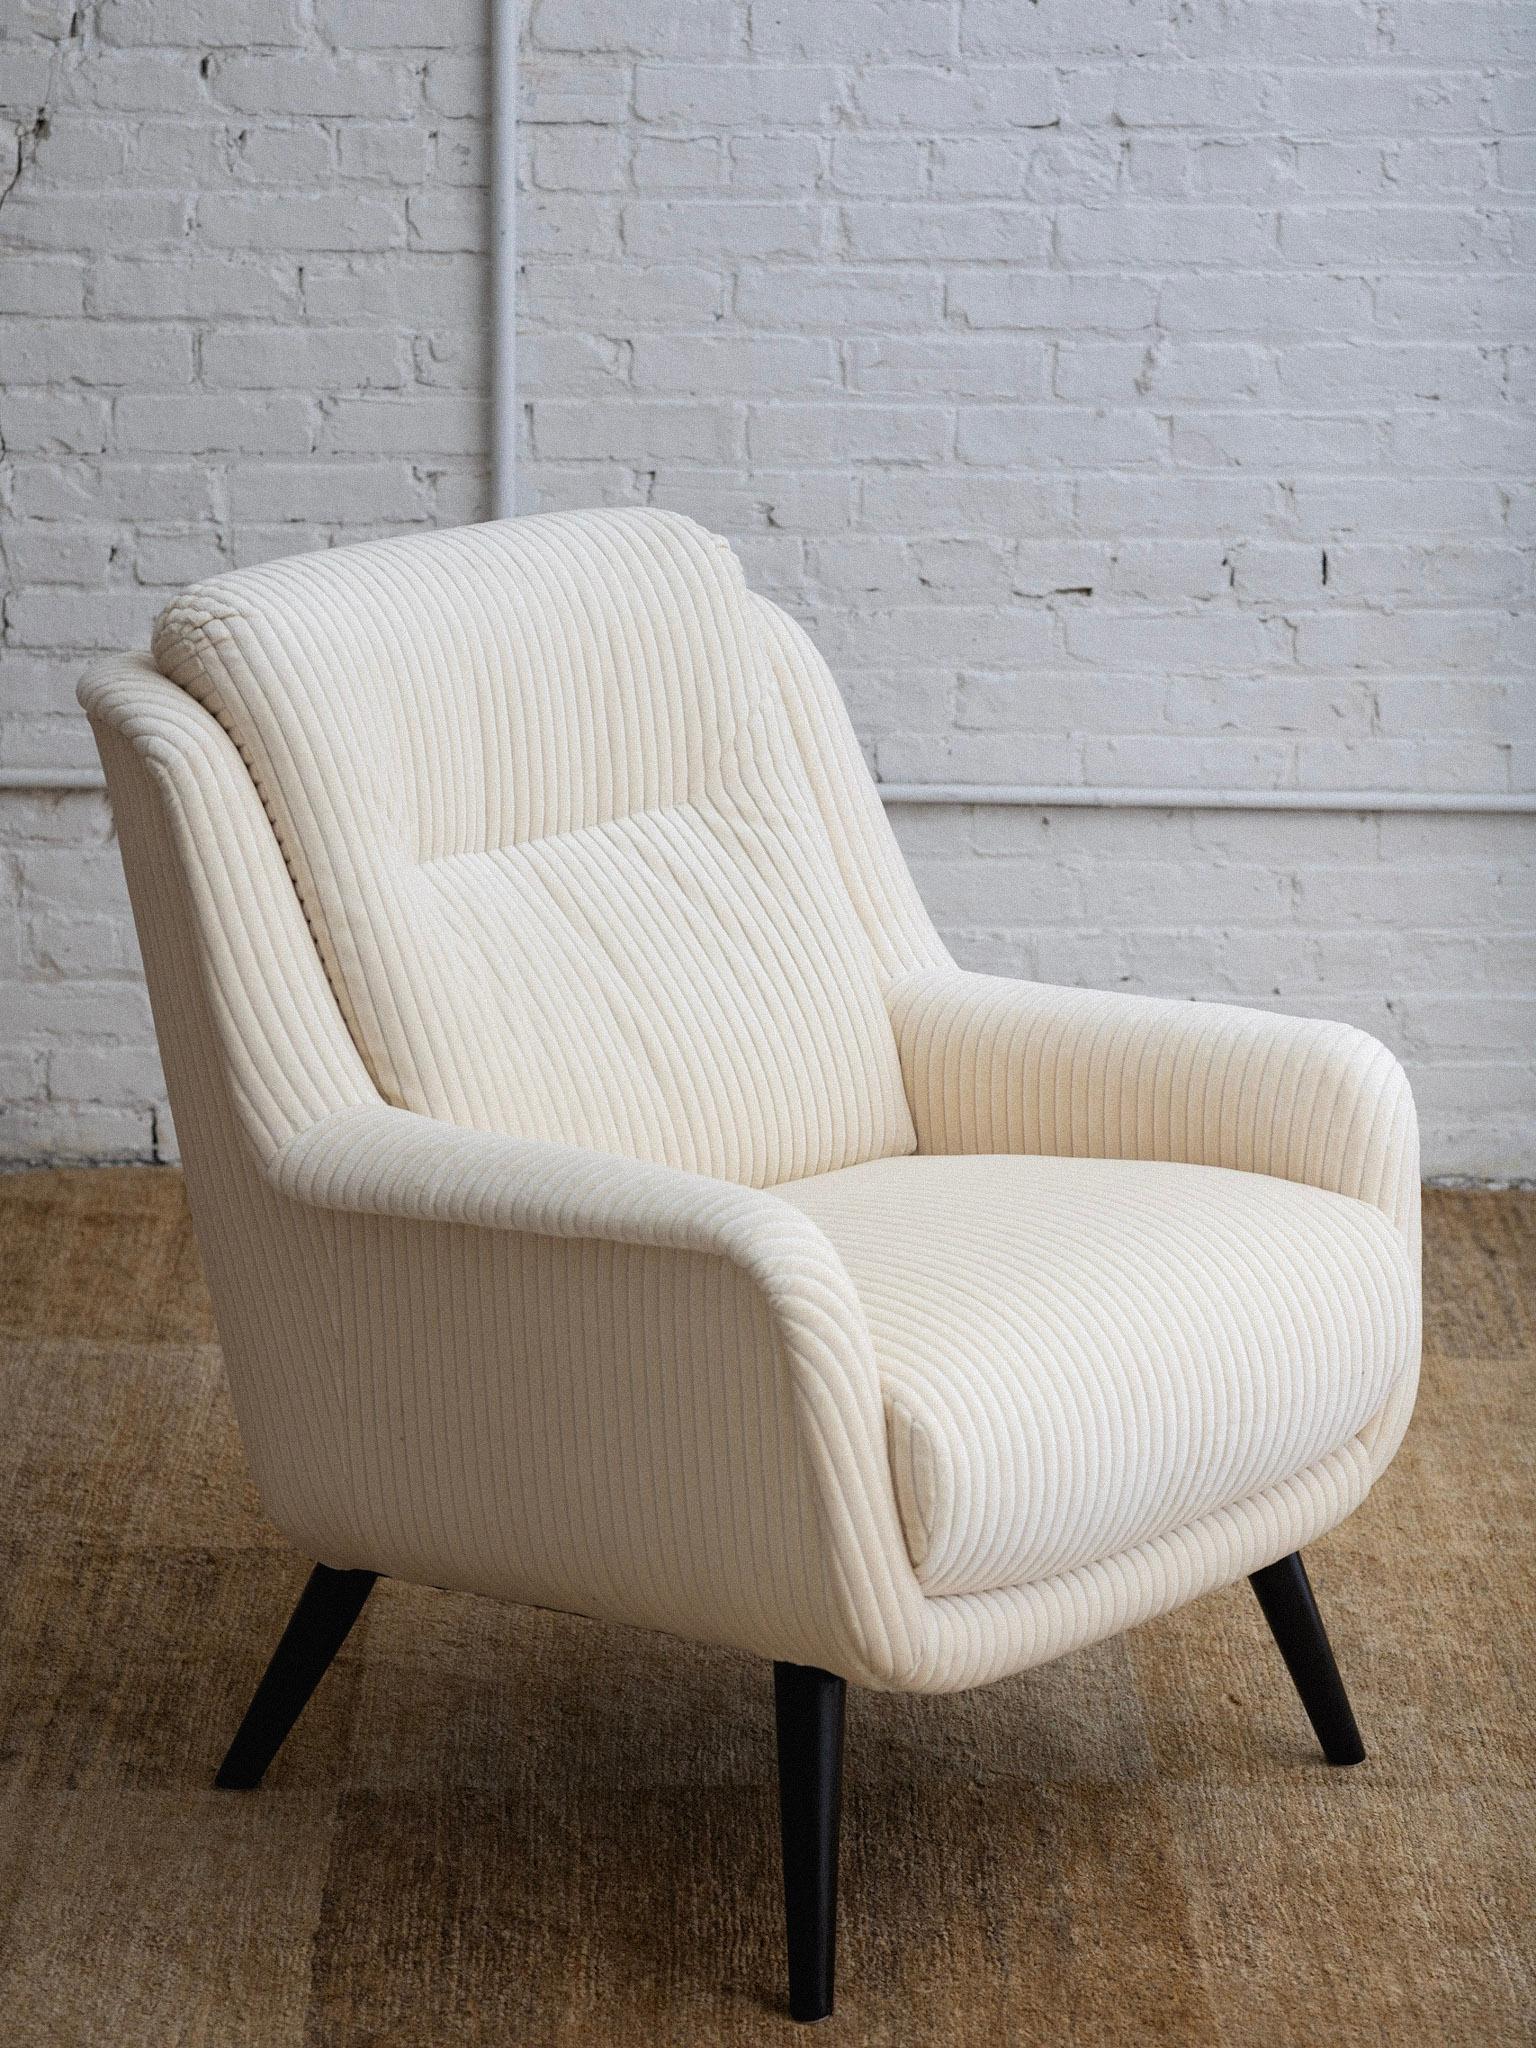 A mid century Italian armchair. Newly reupholstered in a cream velvet corduroy. Black painted wood legs. Pair available, sold individually. Sourced in Northern Italy. 